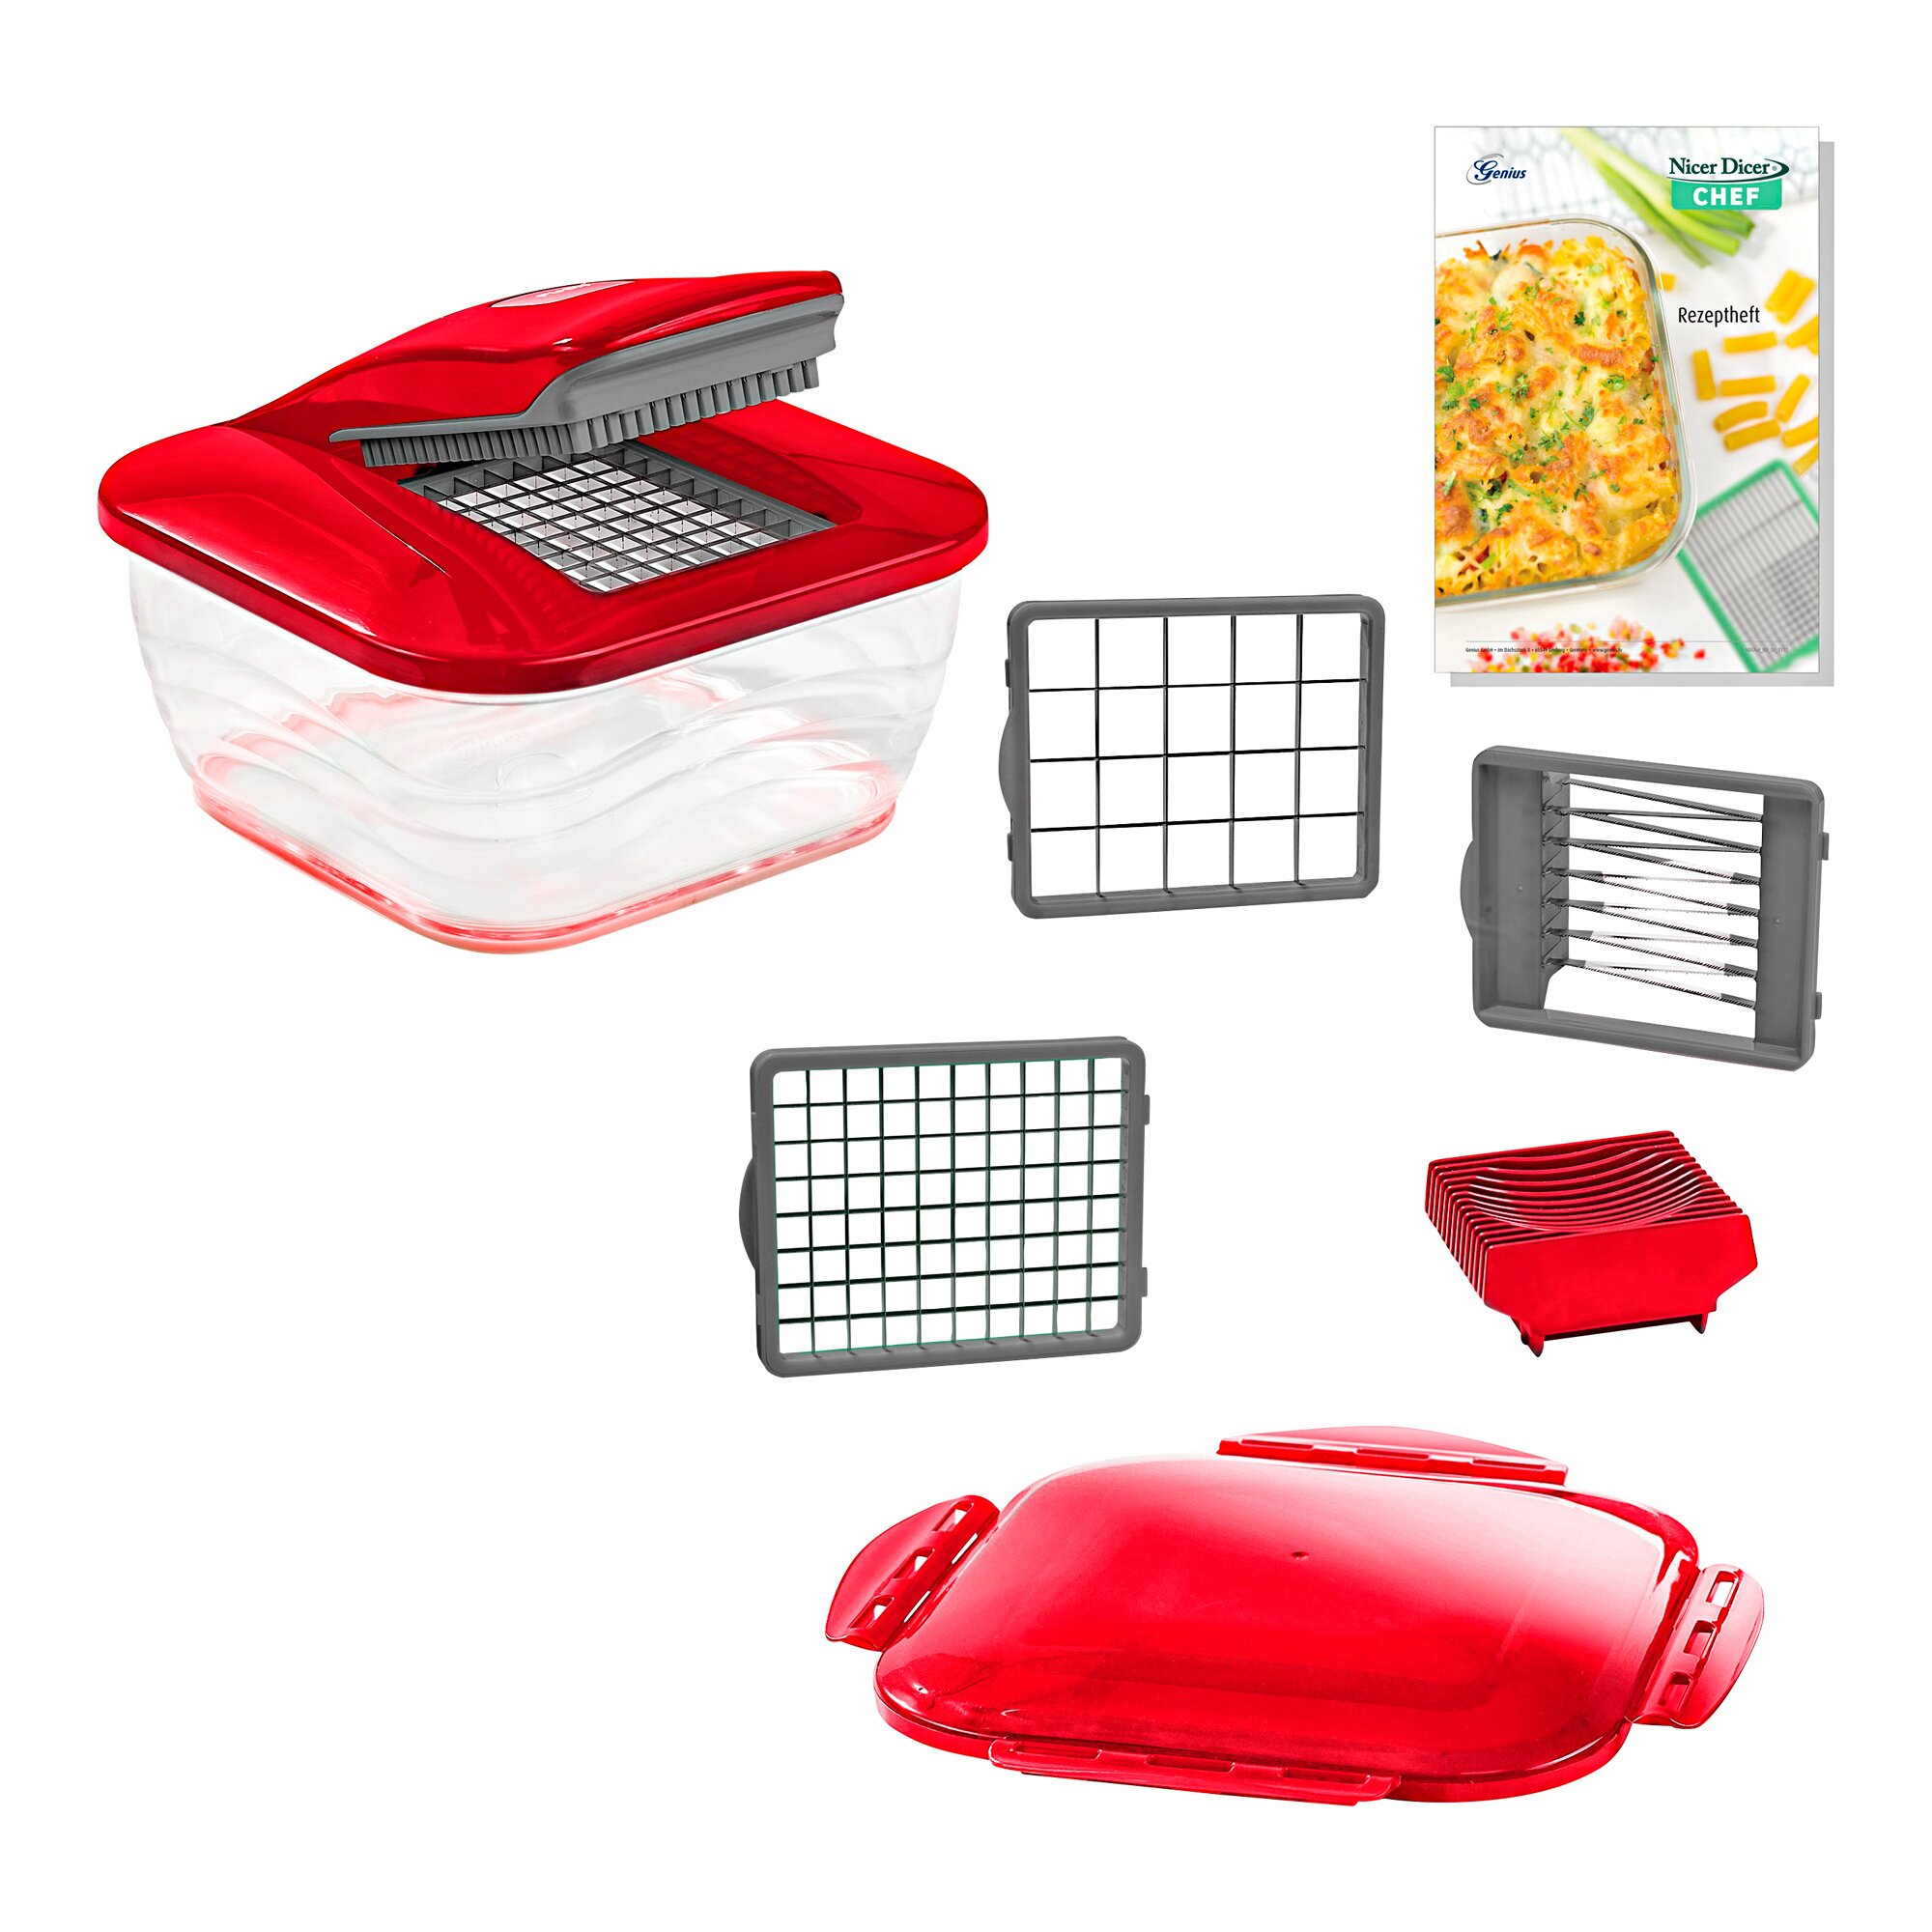 Nicer Dicer Chef Weihnachtsedition, 9 Teile